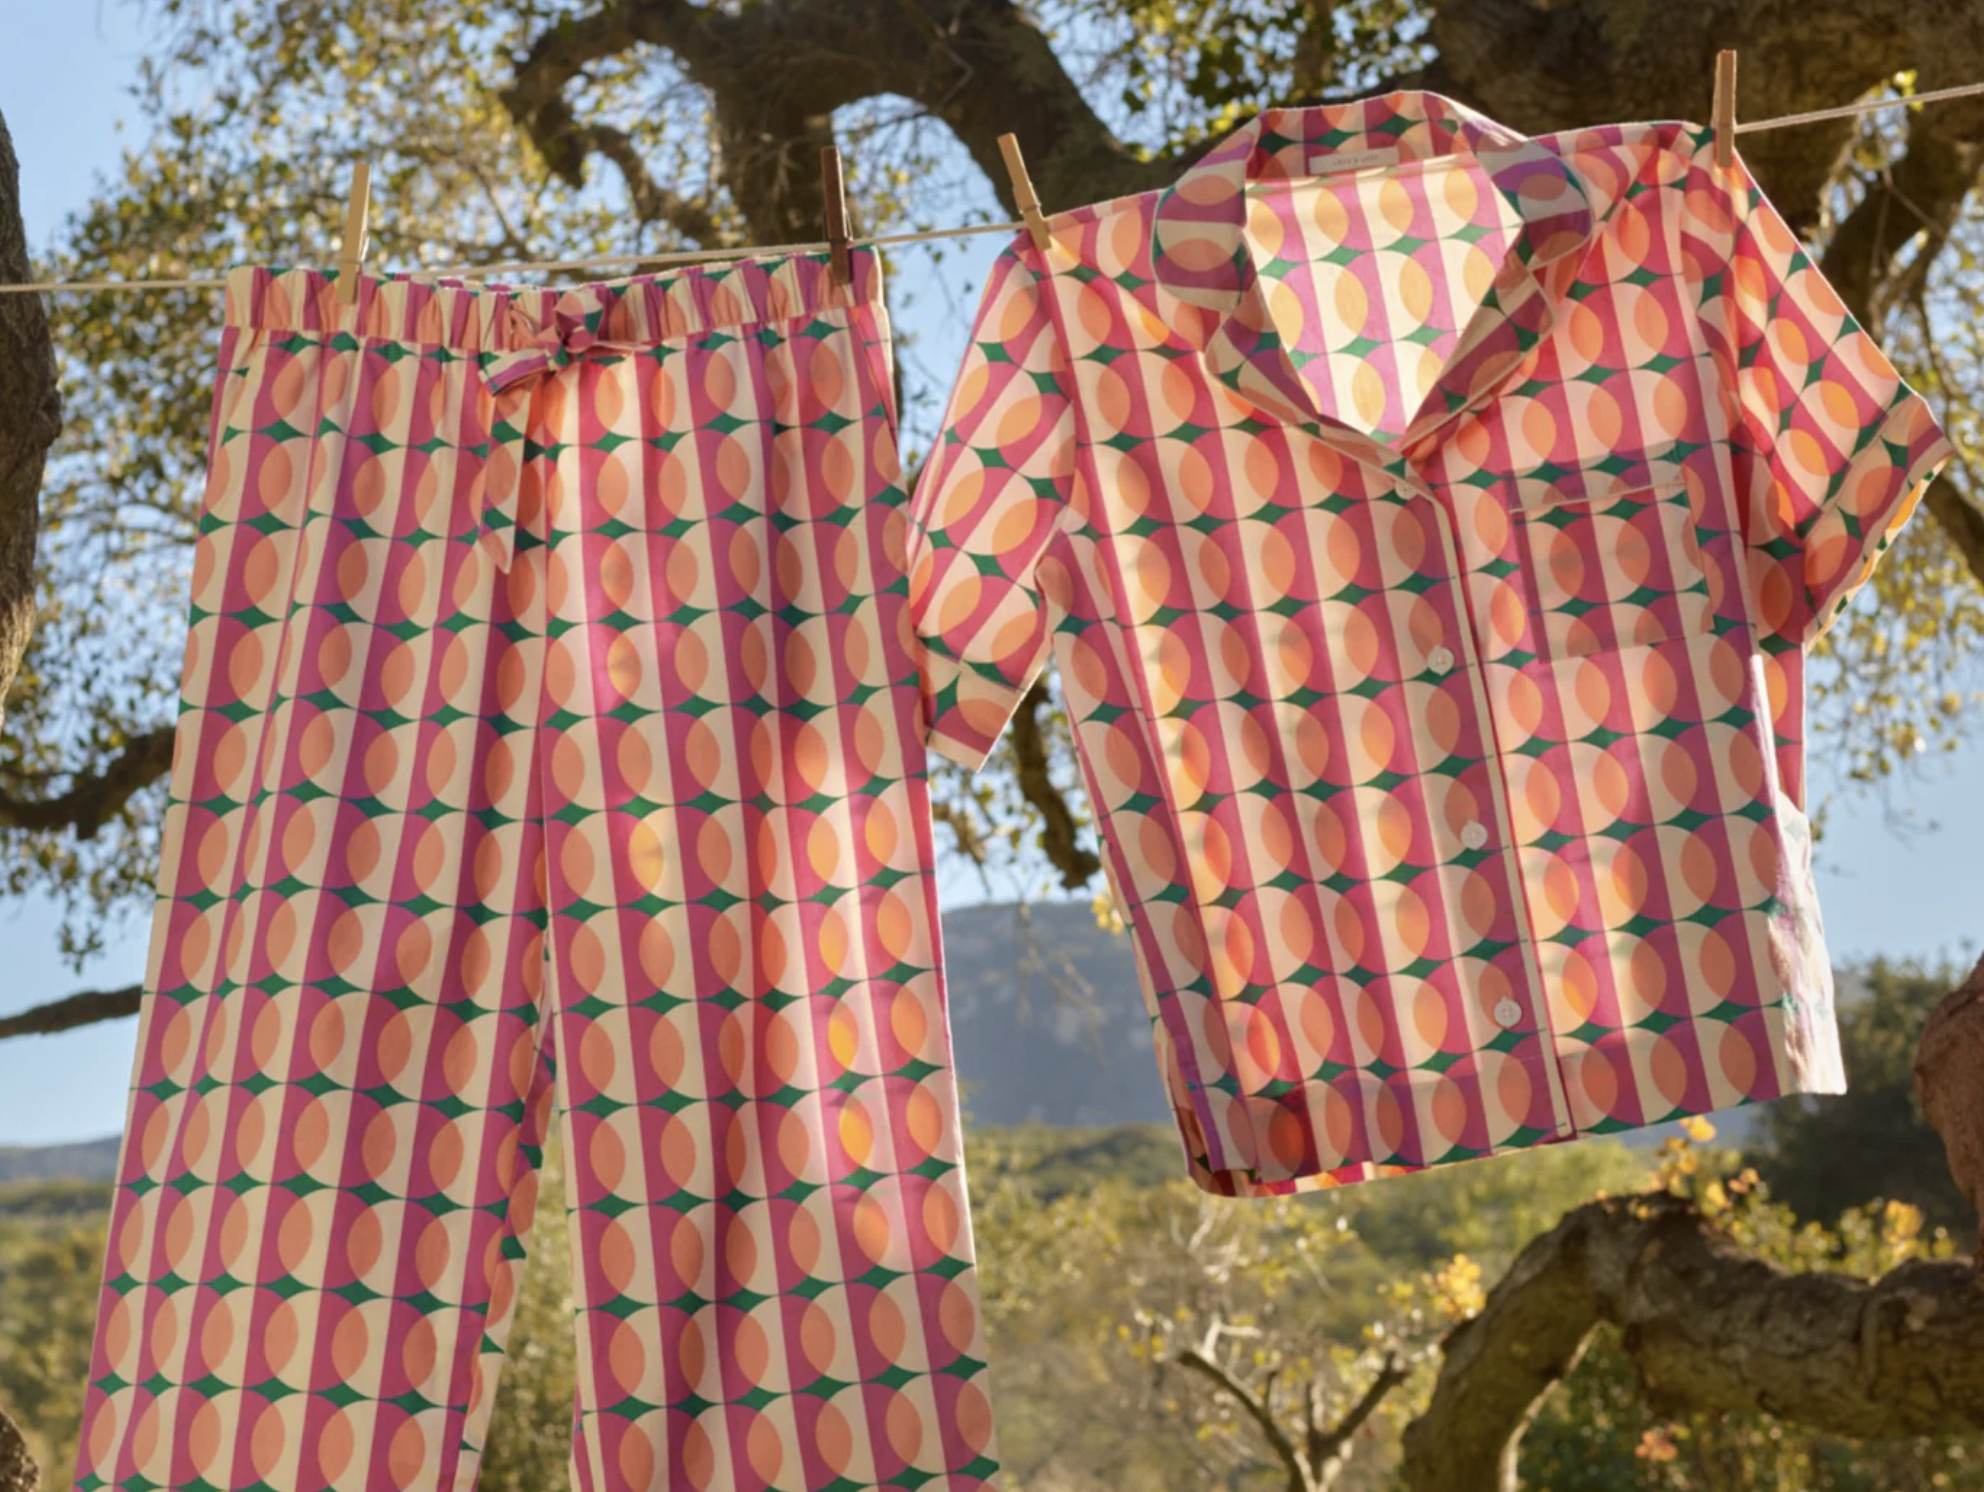 The pyjamas hanging on a clothesline outdoors